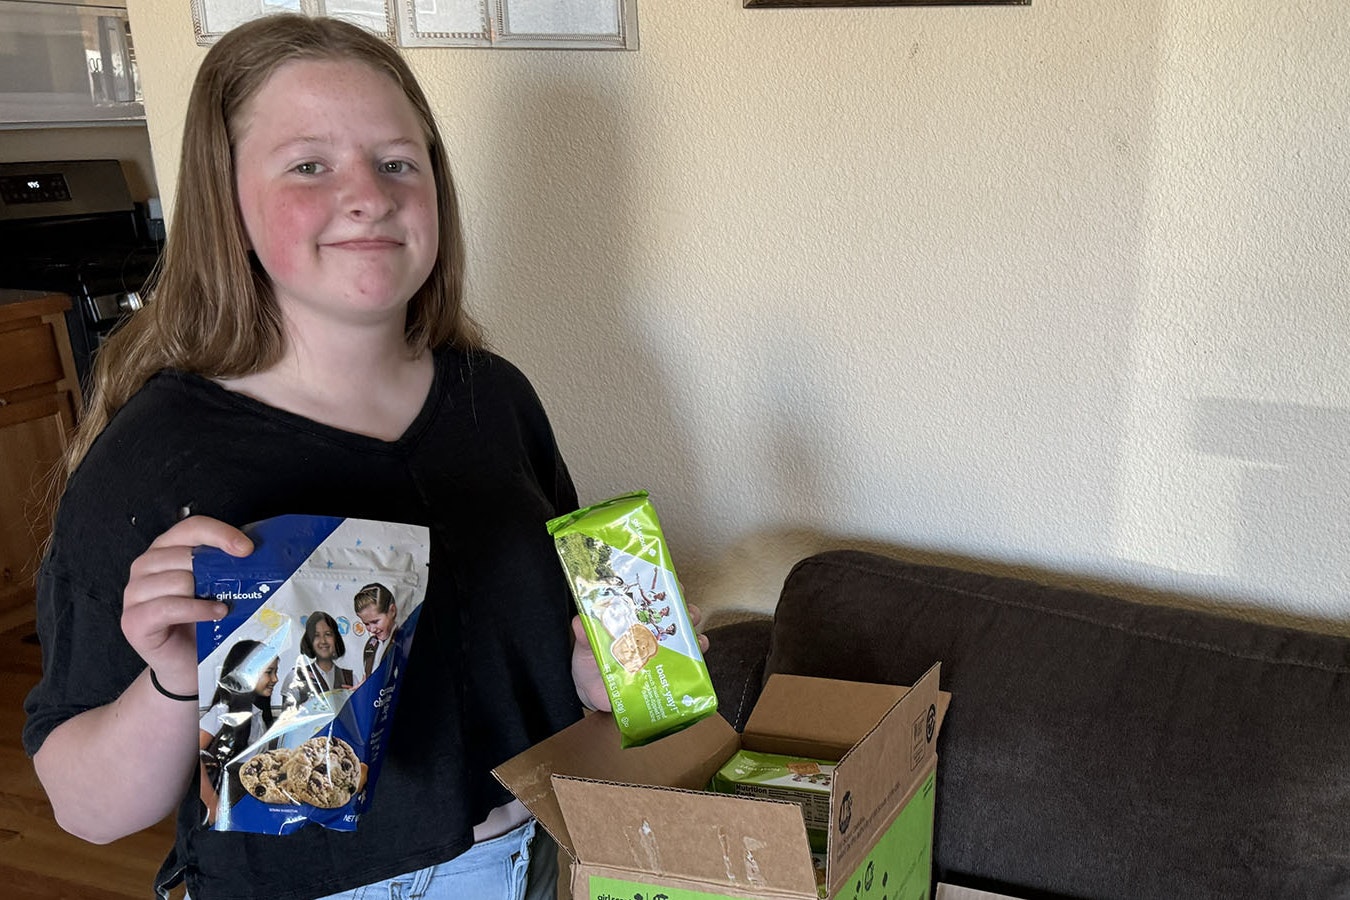 Emma McCarroll, a 13-year-old Girl Scout, shows off some of the remaining Girl Scout Cookies that she has left to sell. She’s hawked nearly 1,200 boxes so far, good enough to pay her way to summer camp in Montana.